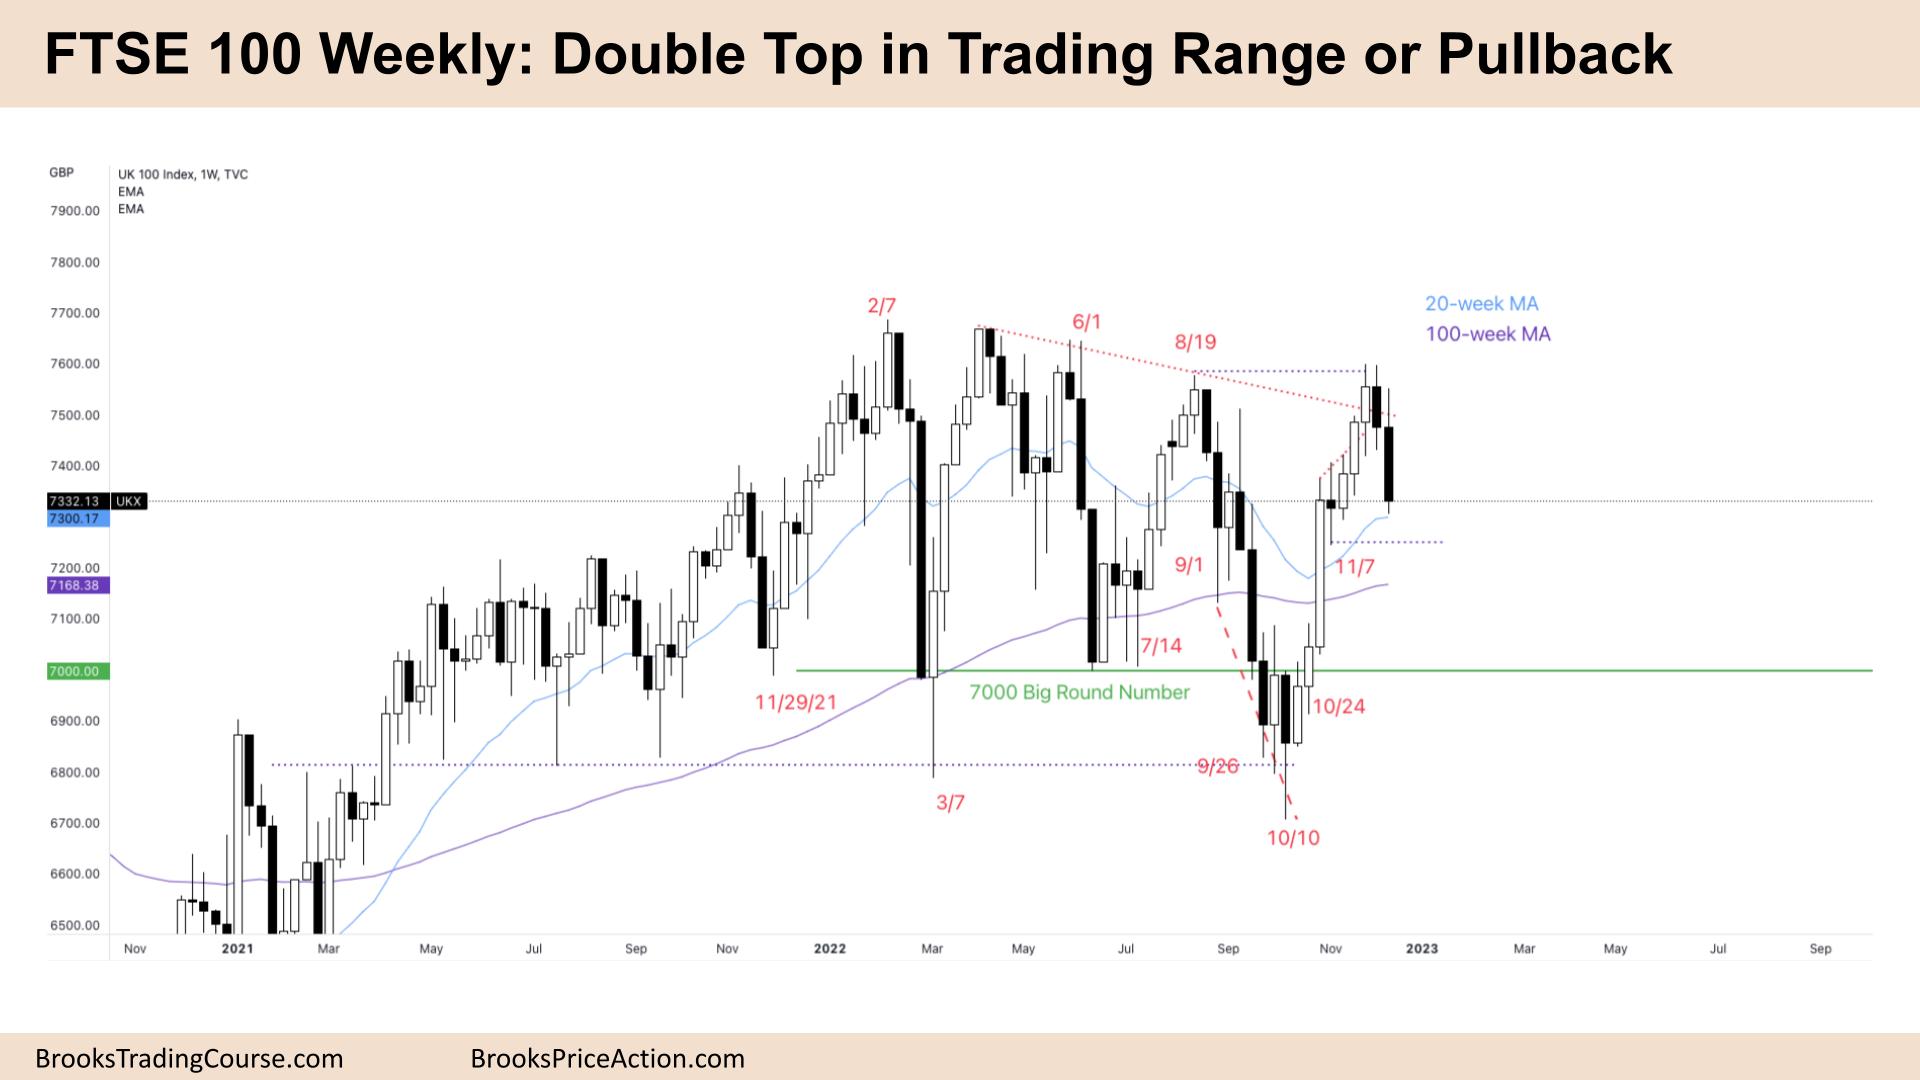 FTSE 100 Double Top in Trading Range or Pullback